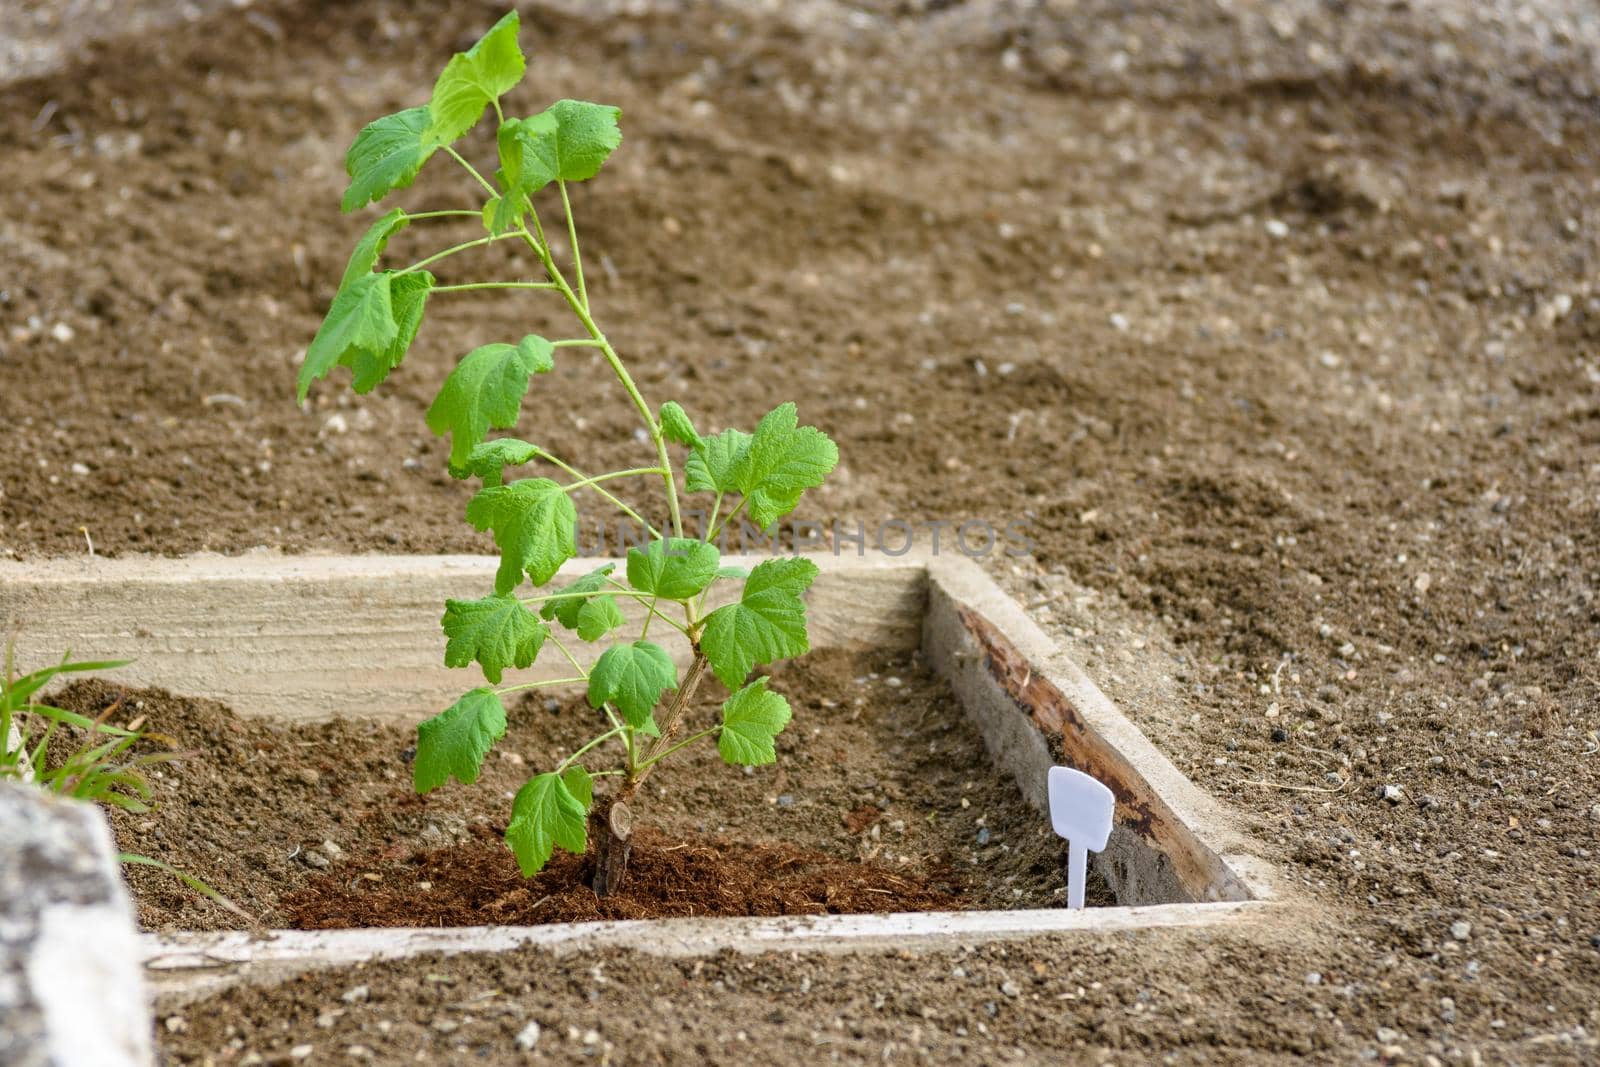 Currant seedling in a wooden flower bed on the background of weeded earth by Madhourse